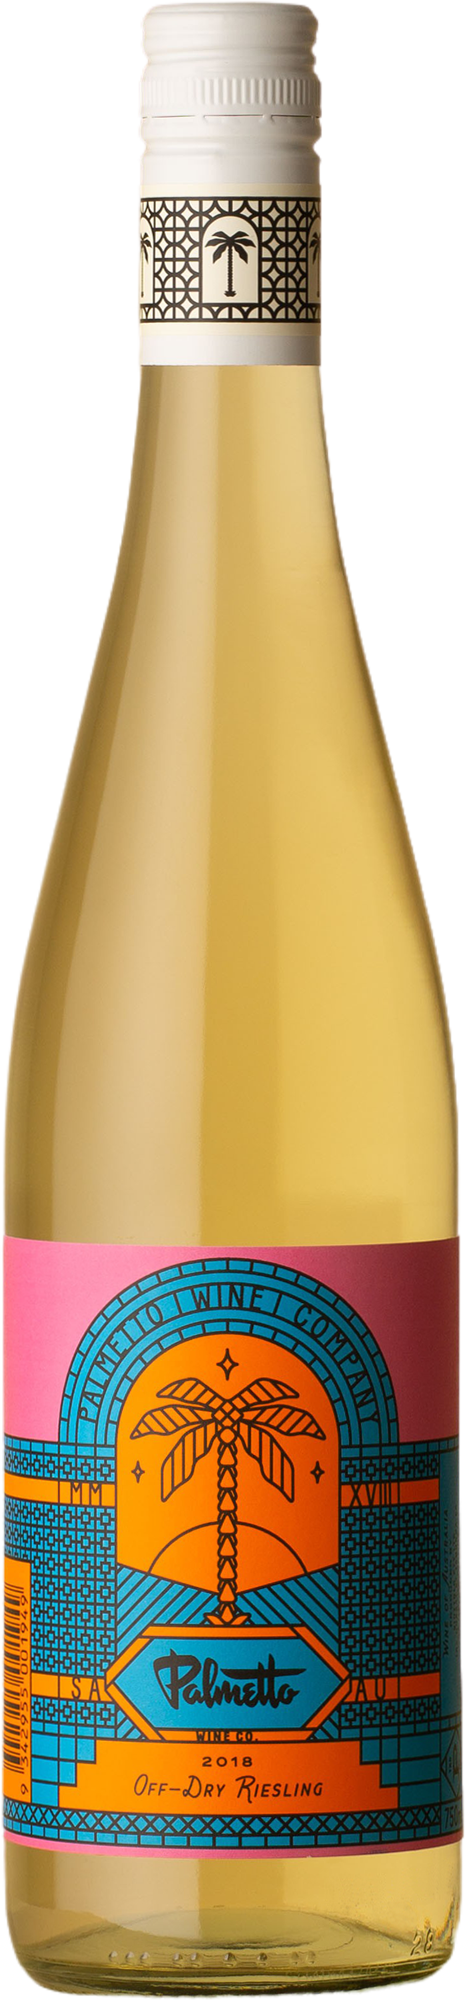 Palmetto - Off-Dry Riesling 2018 White Wine